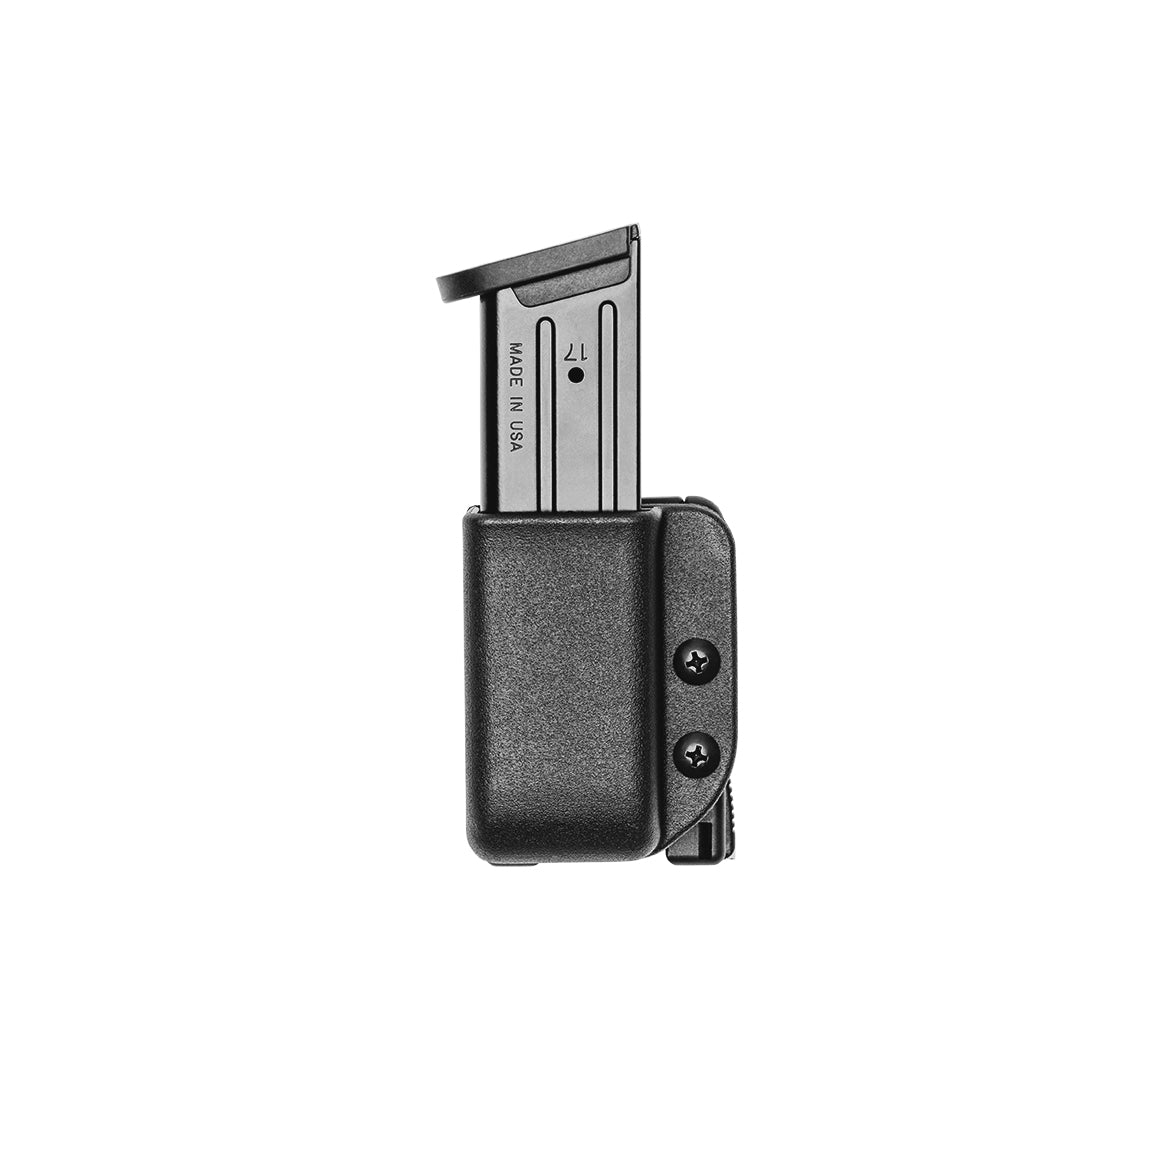 Purchase the Mil-Tec Single Magazine Pouch with Velcro Backing o